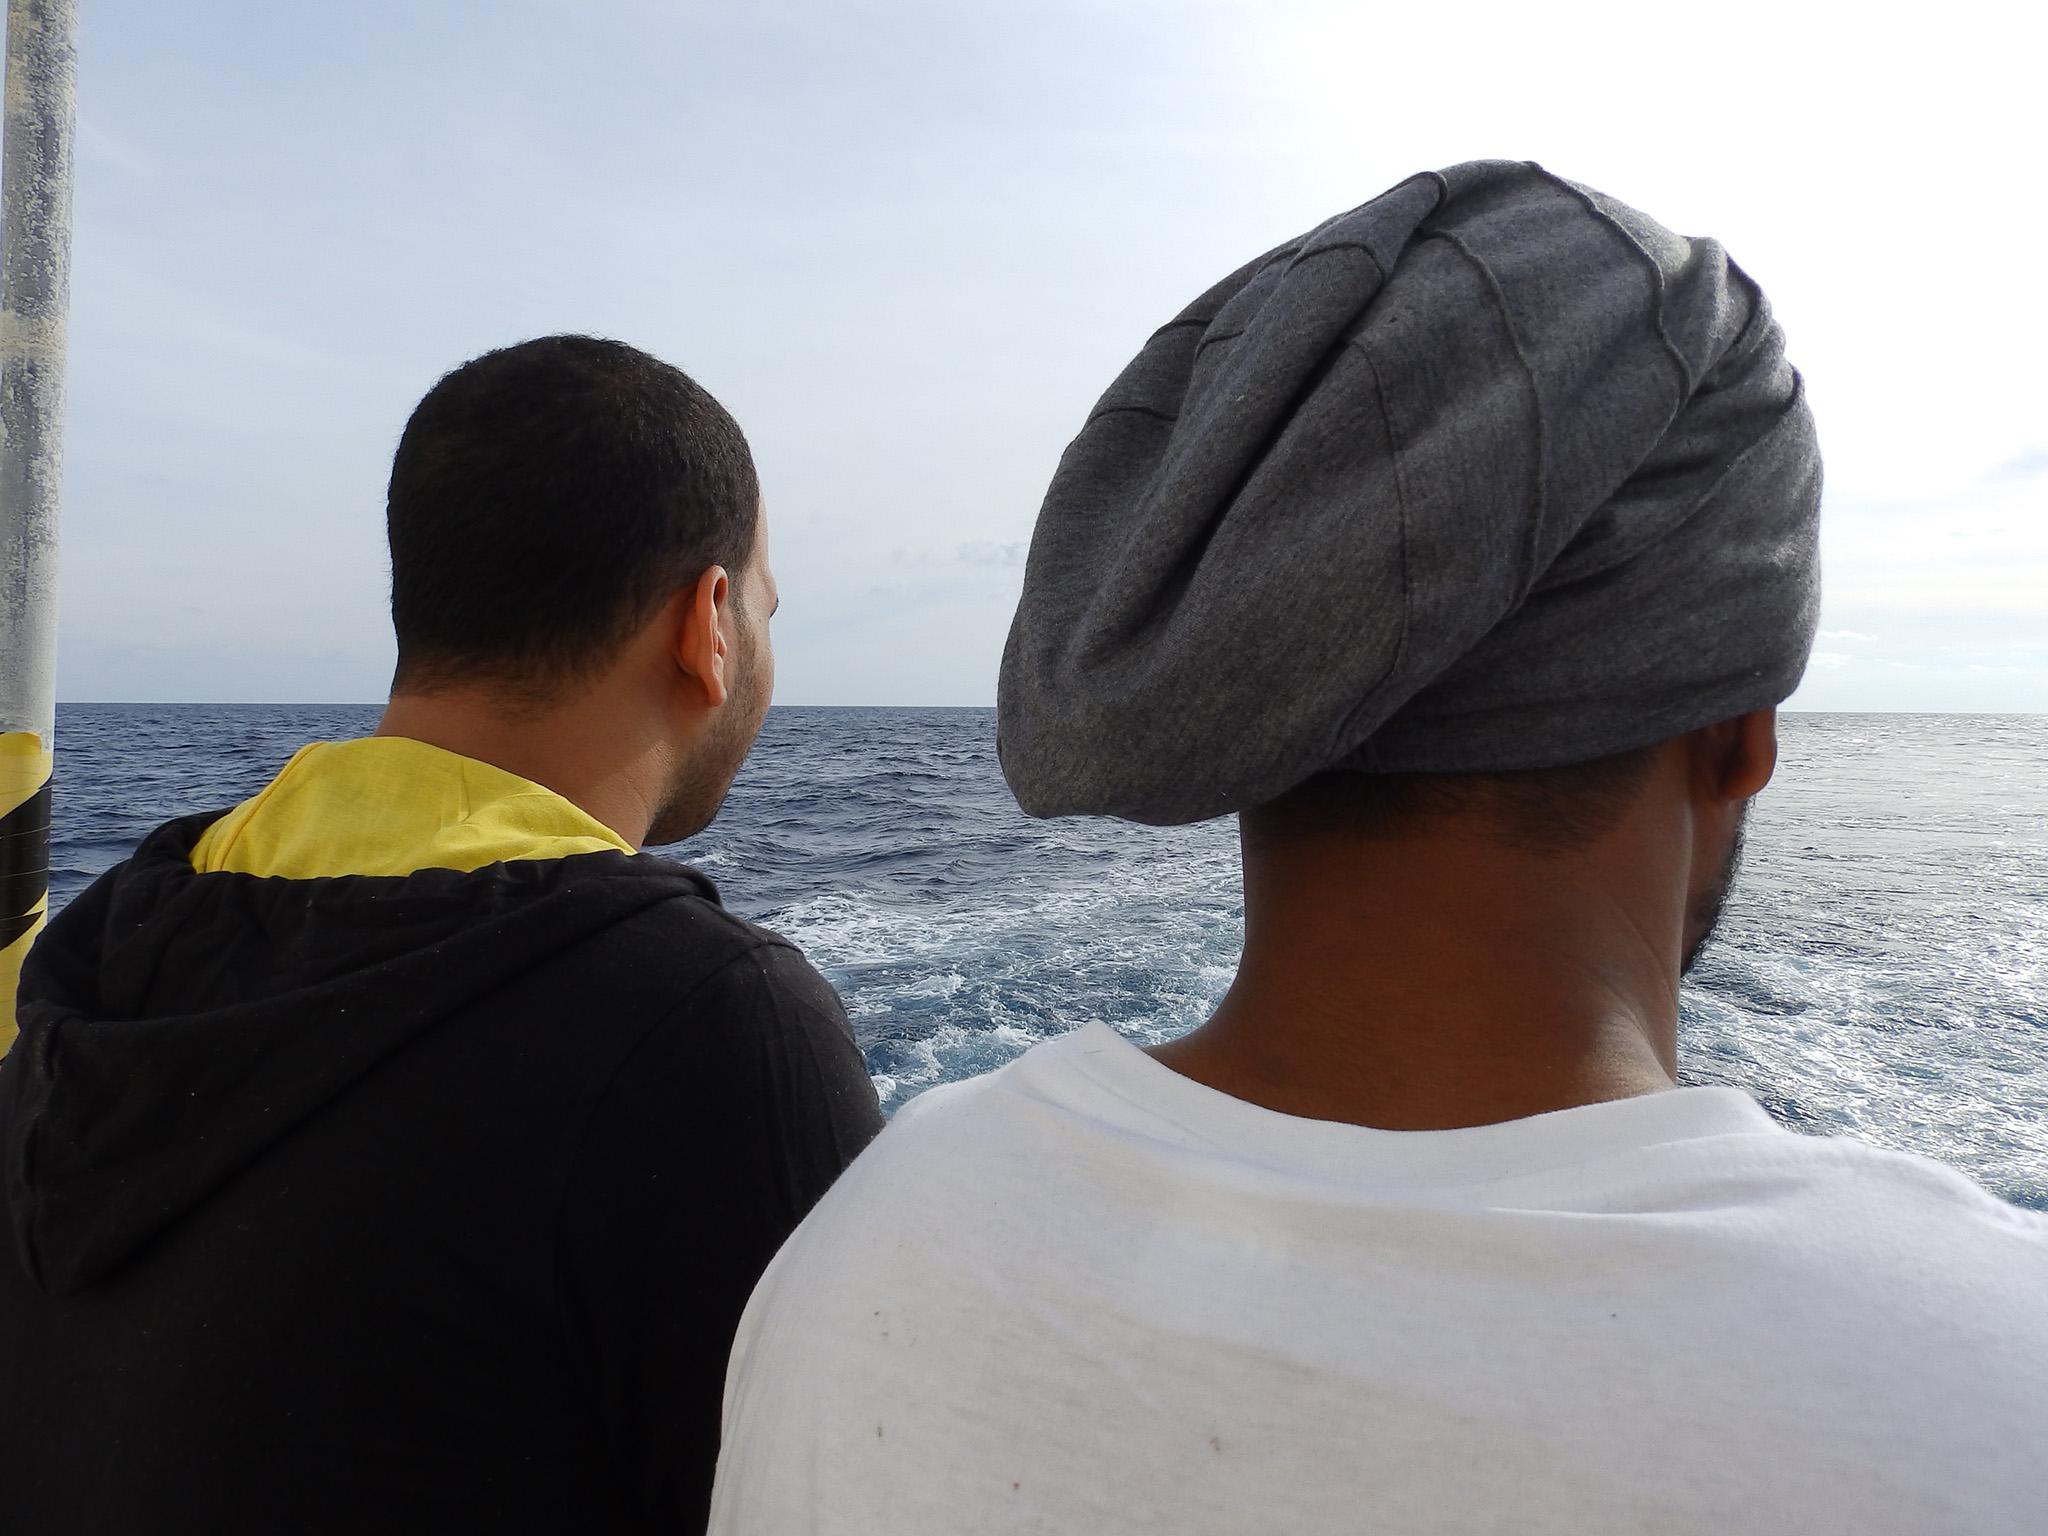 Yahia bin Yahia, 27, and Hamza Menel, 26, paid extra to board a wooden boat, but smugglers forced them into a rubber dinghy instead